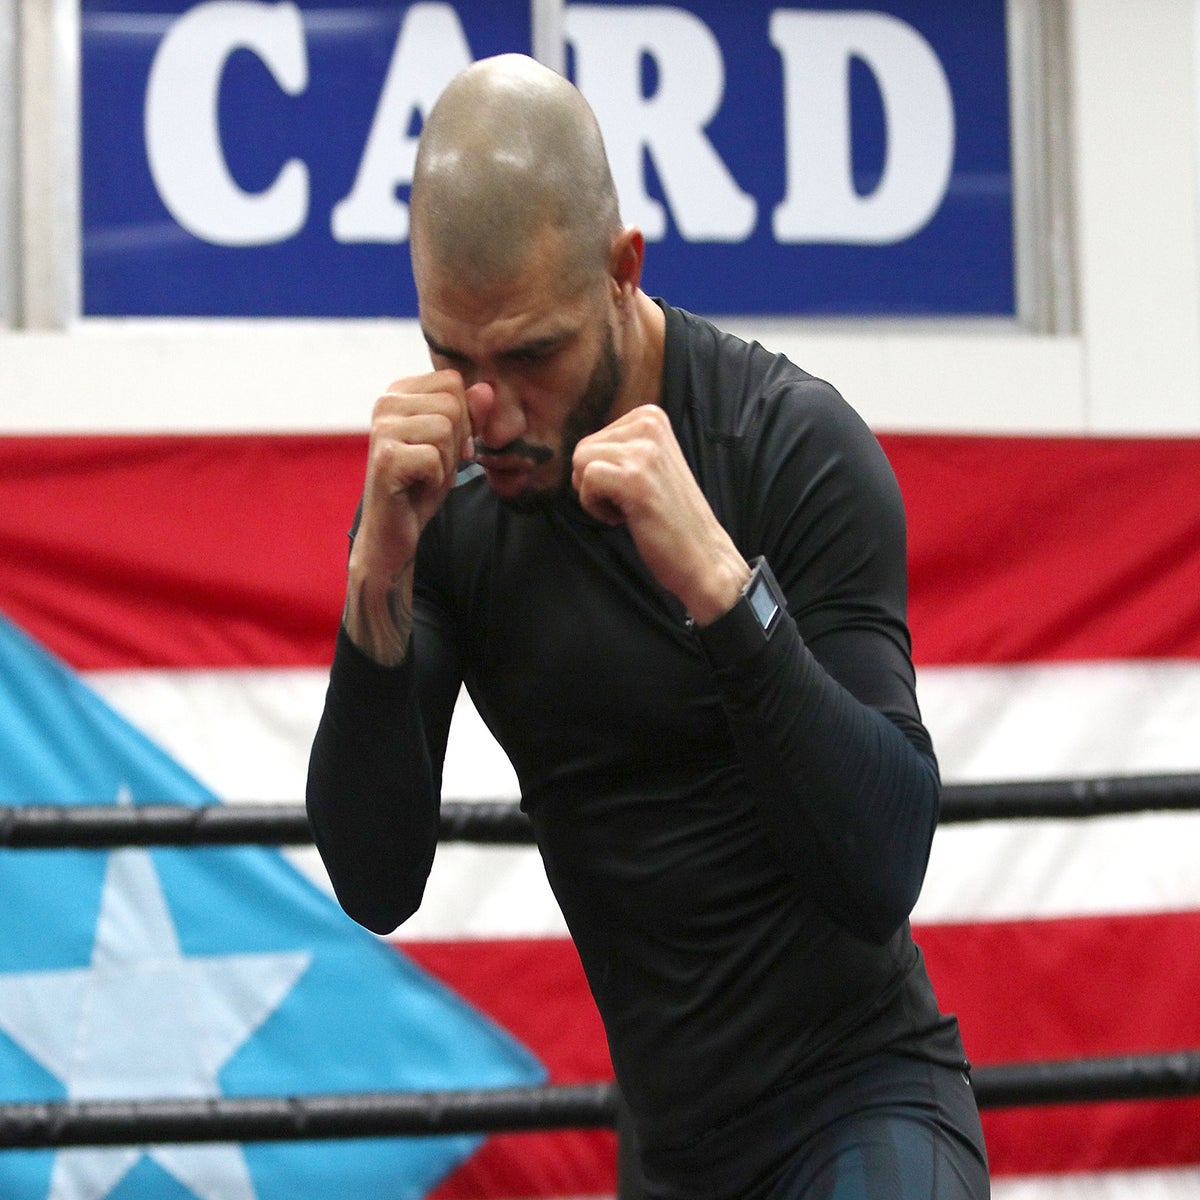 Why Boxing Needs More of Miguel Cotto in Madison Square Garden